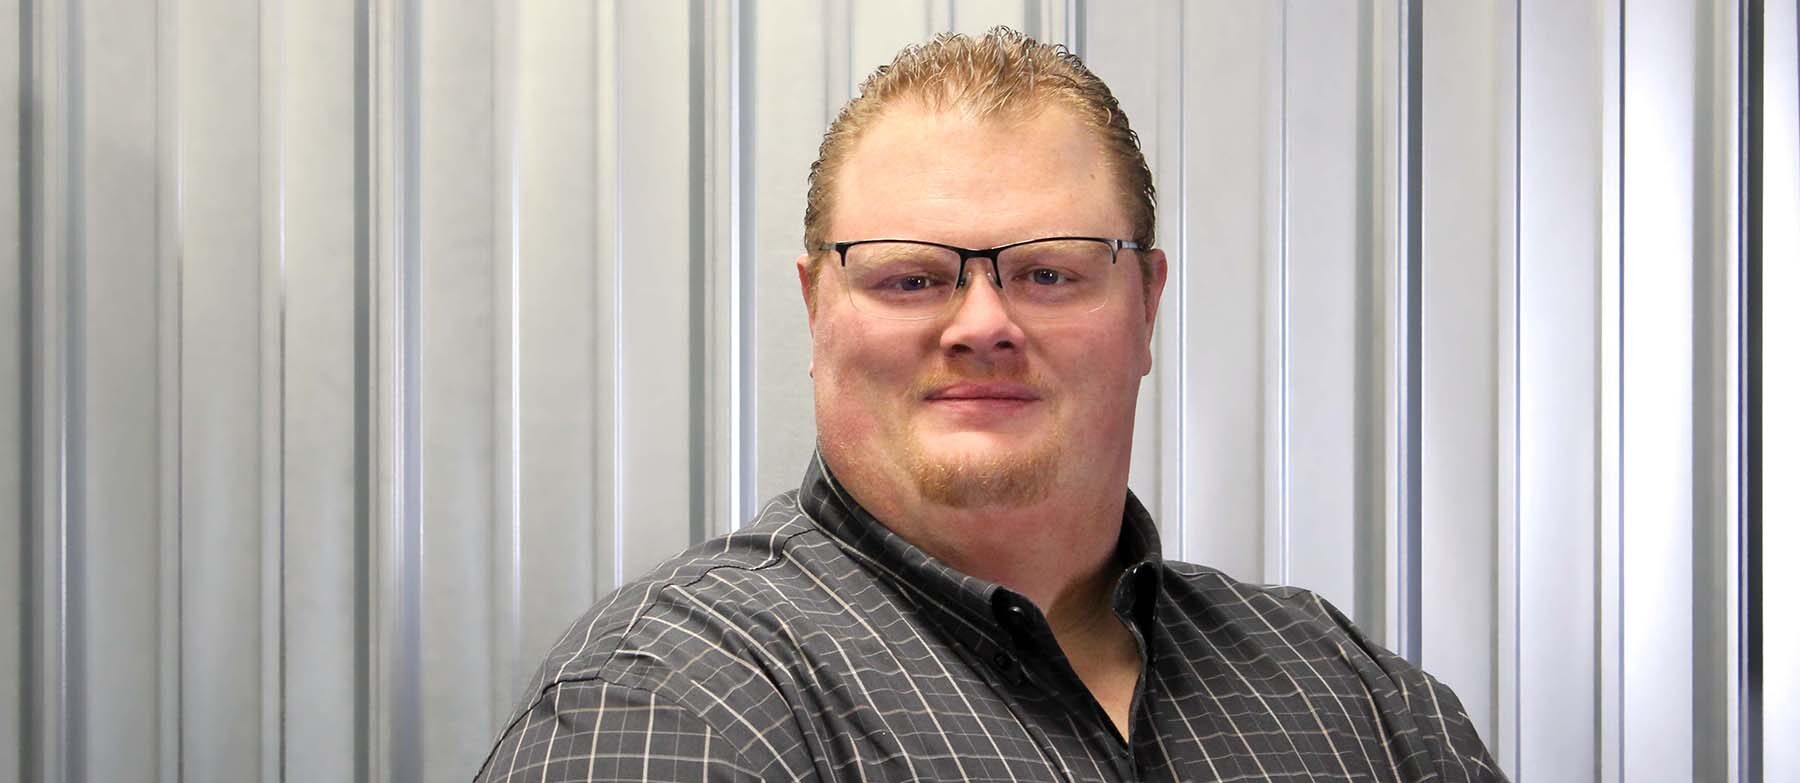 Lubrication Specialties Names New Digital Marketing Manager | THE SHOP